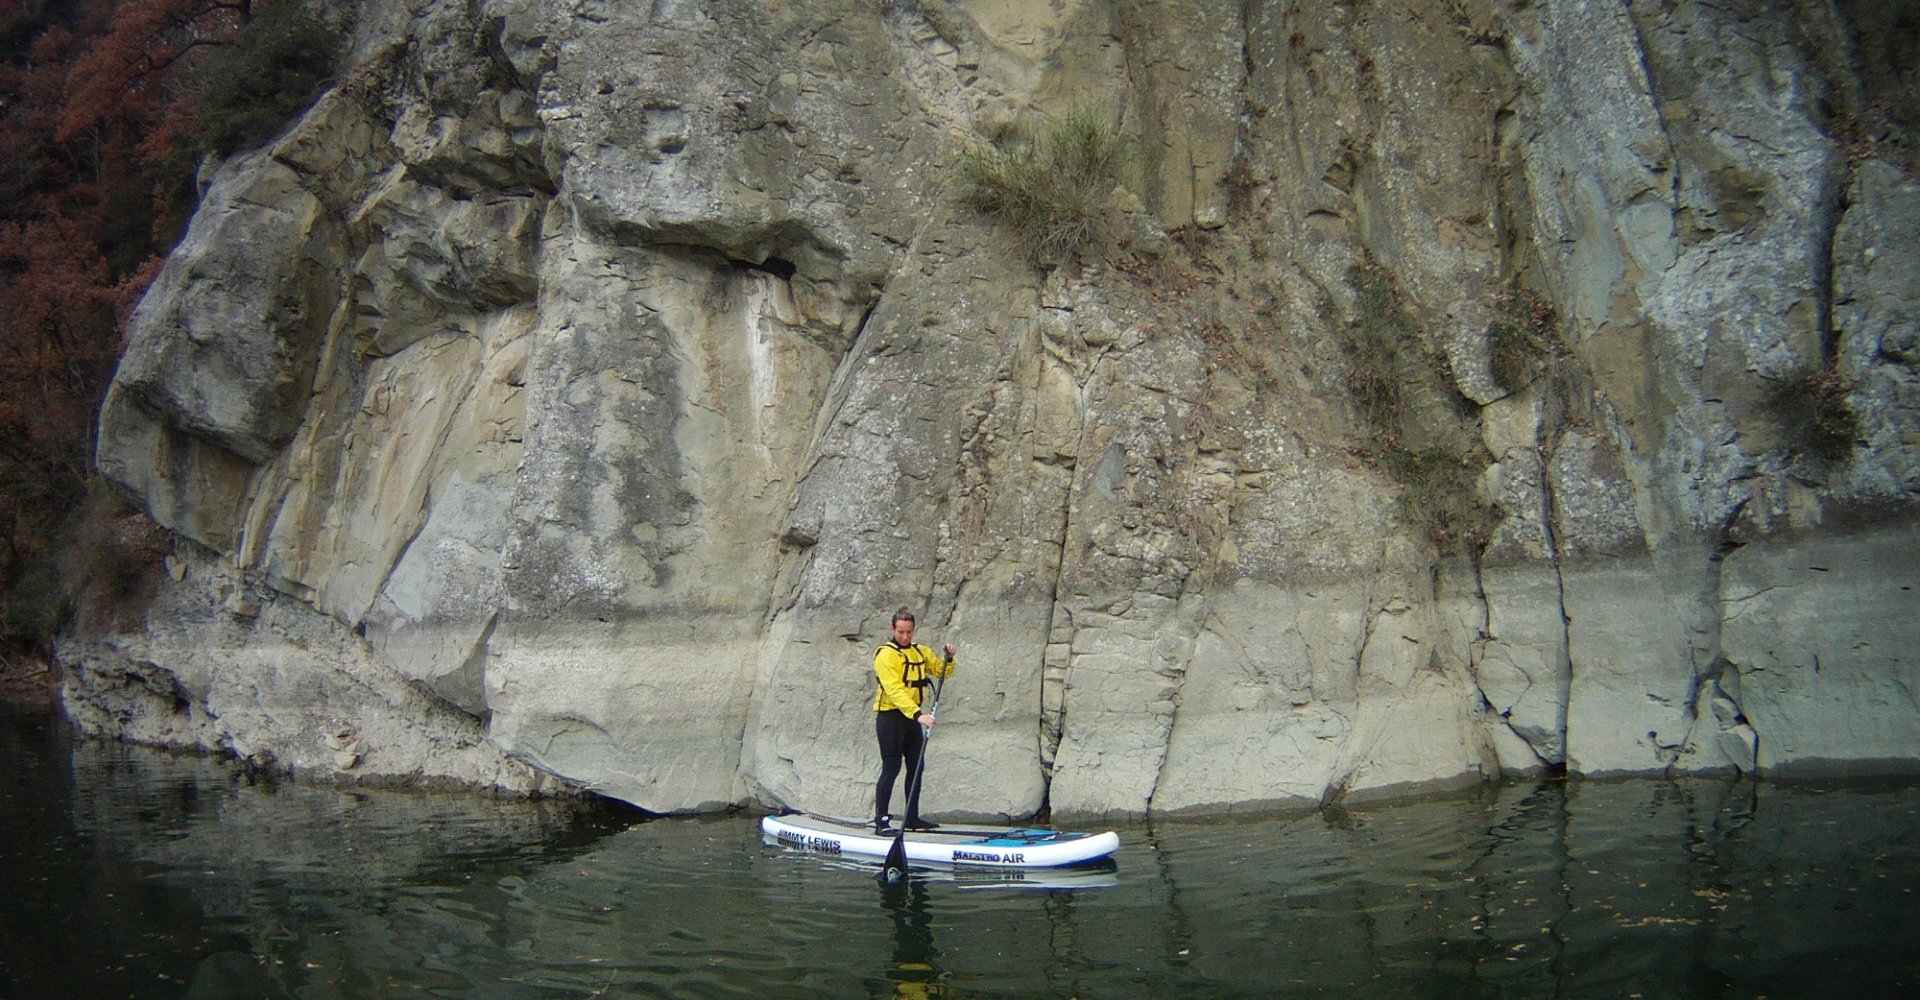 SUP experience in the Valdarno area